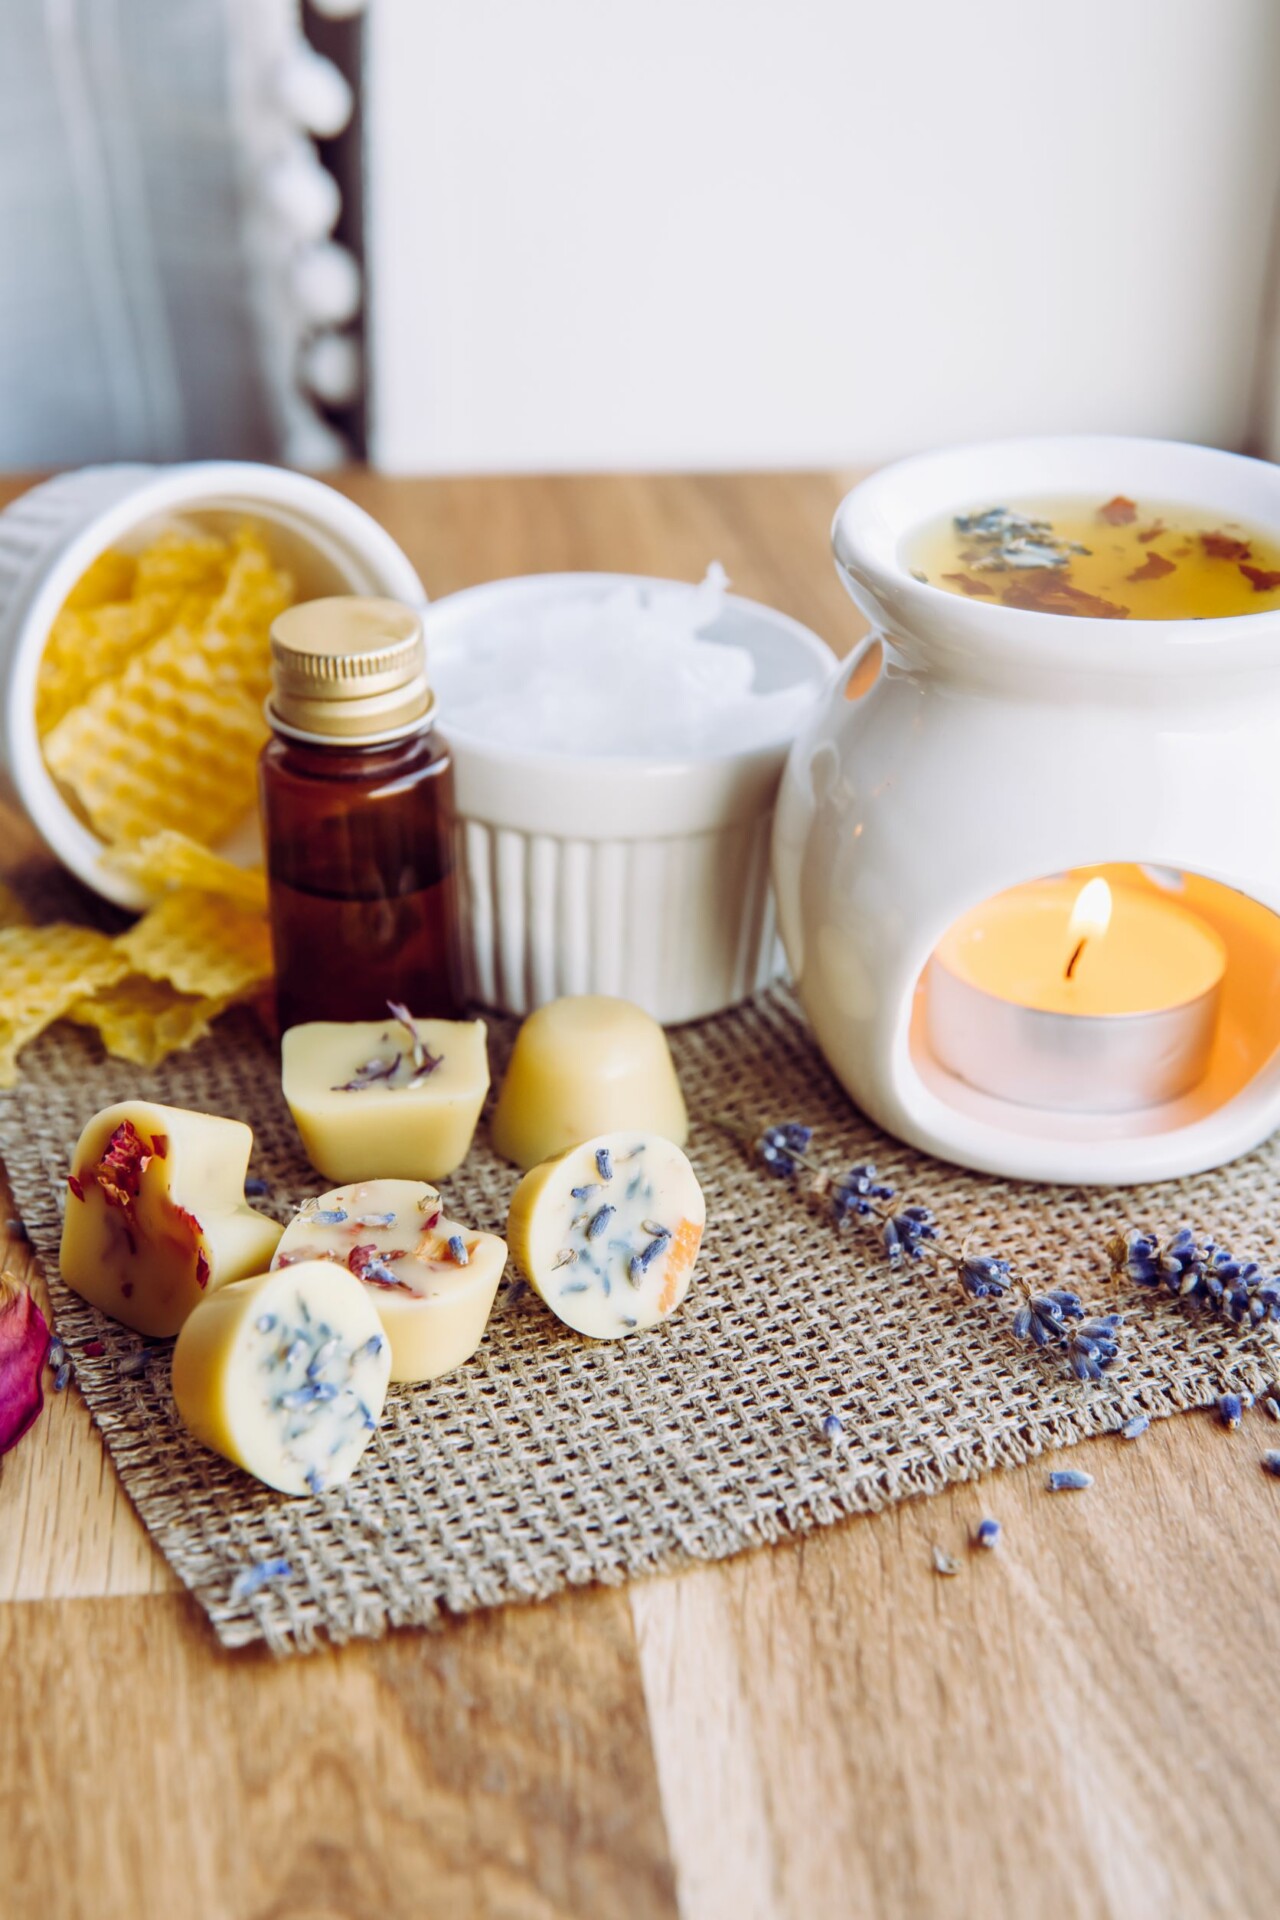 Are Wax Melts Eco-Friendly? 12 Important Facts